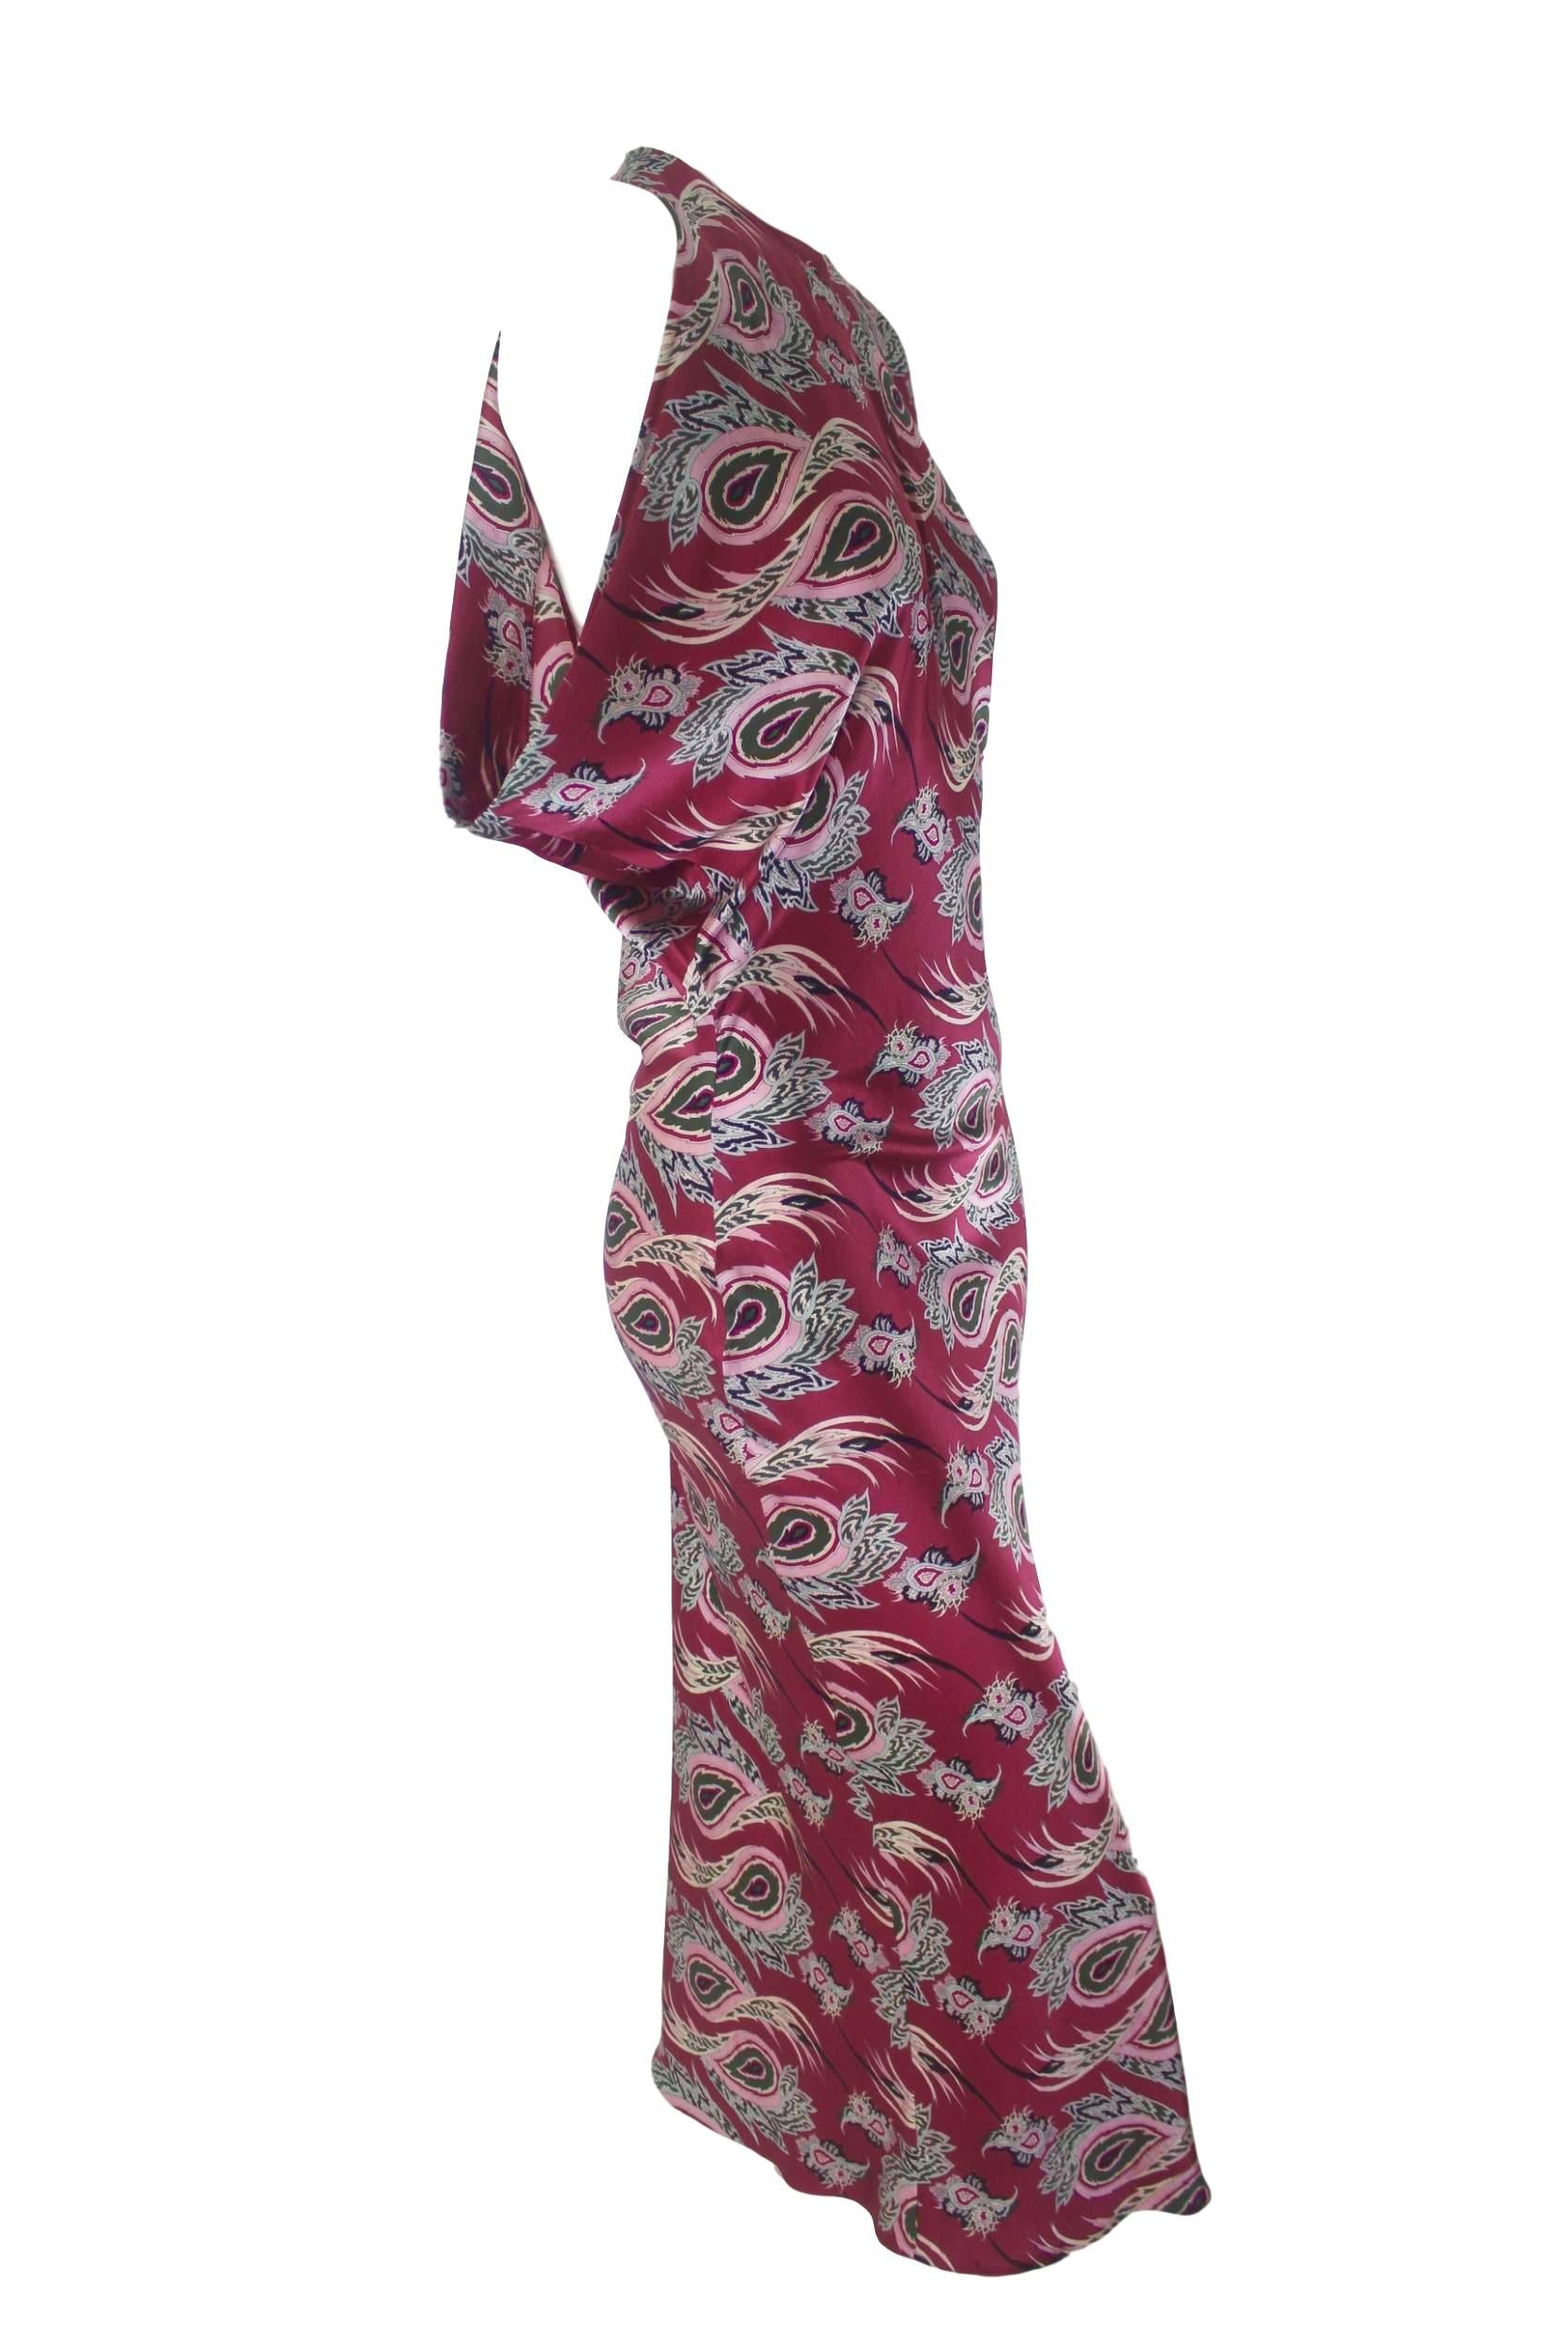 Alexander McQueen Paisley Silk Evening Dress 2001 In Excellent Condition For Sale In Bath, GB